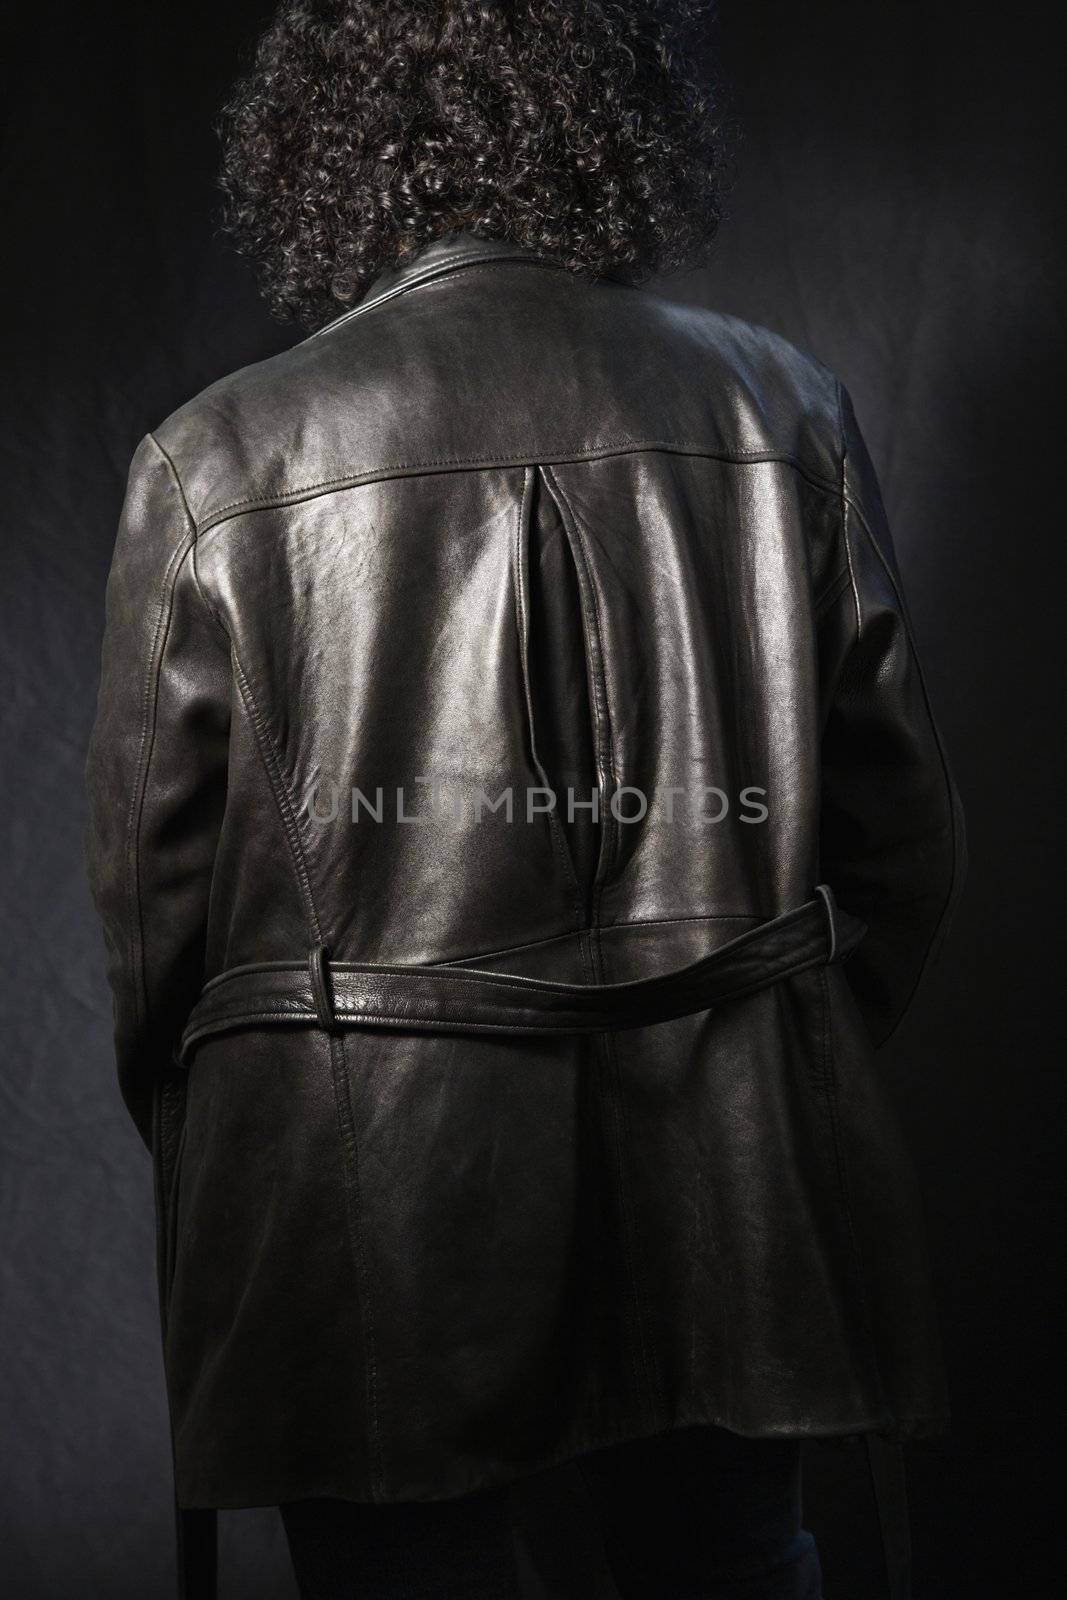 Back view of woman with curly hair wearing black leather jacket.